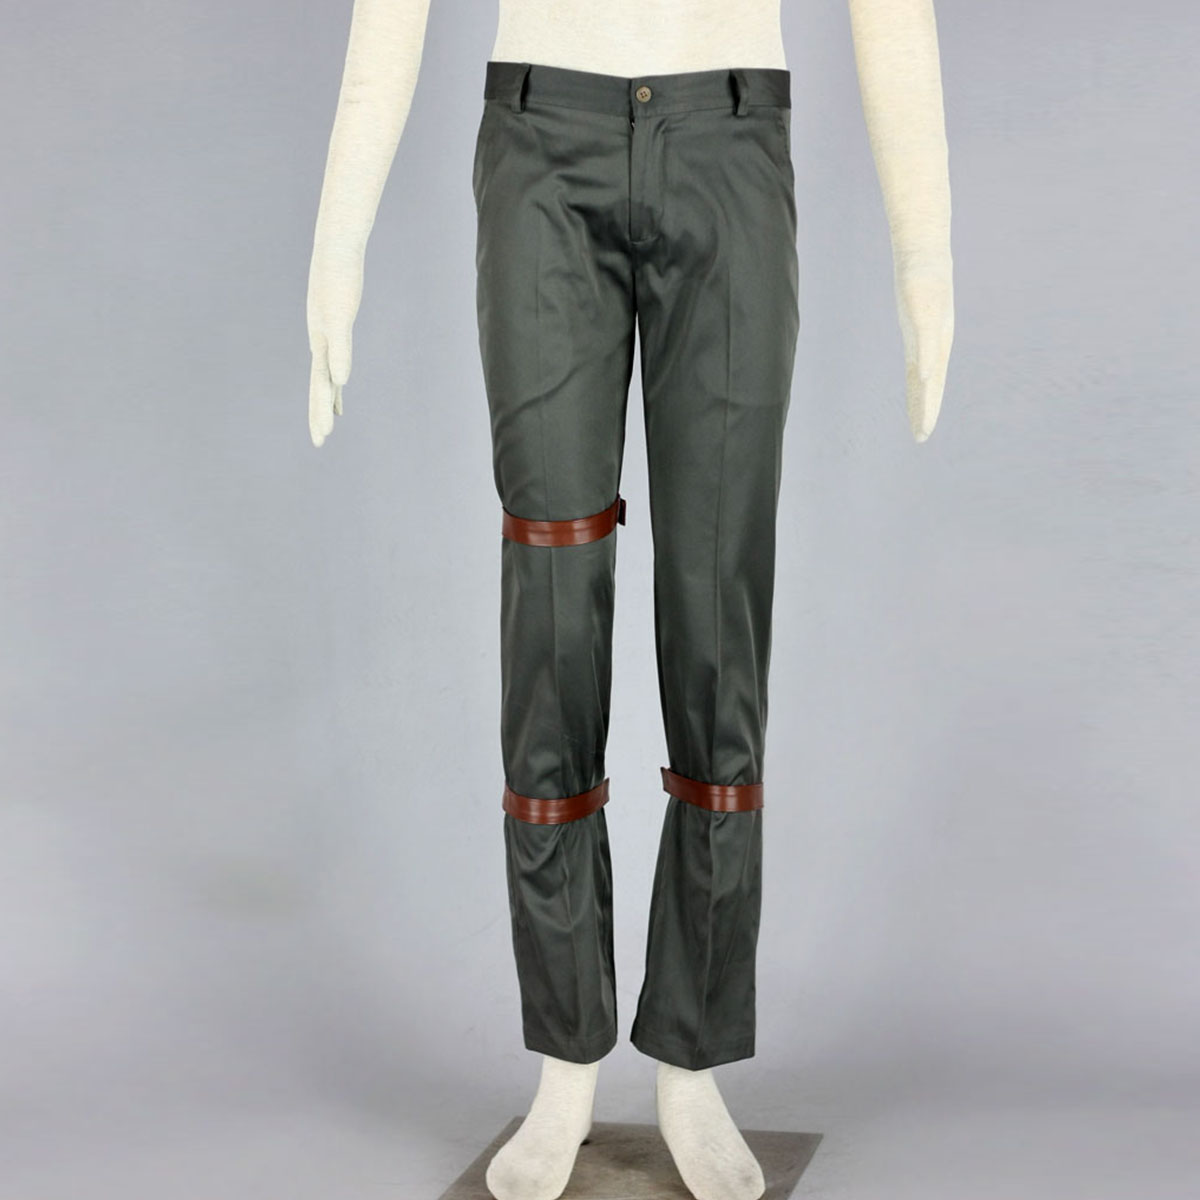 Naruto Shippuden Gaara 6 Anime Cosplay Costumes Outfit